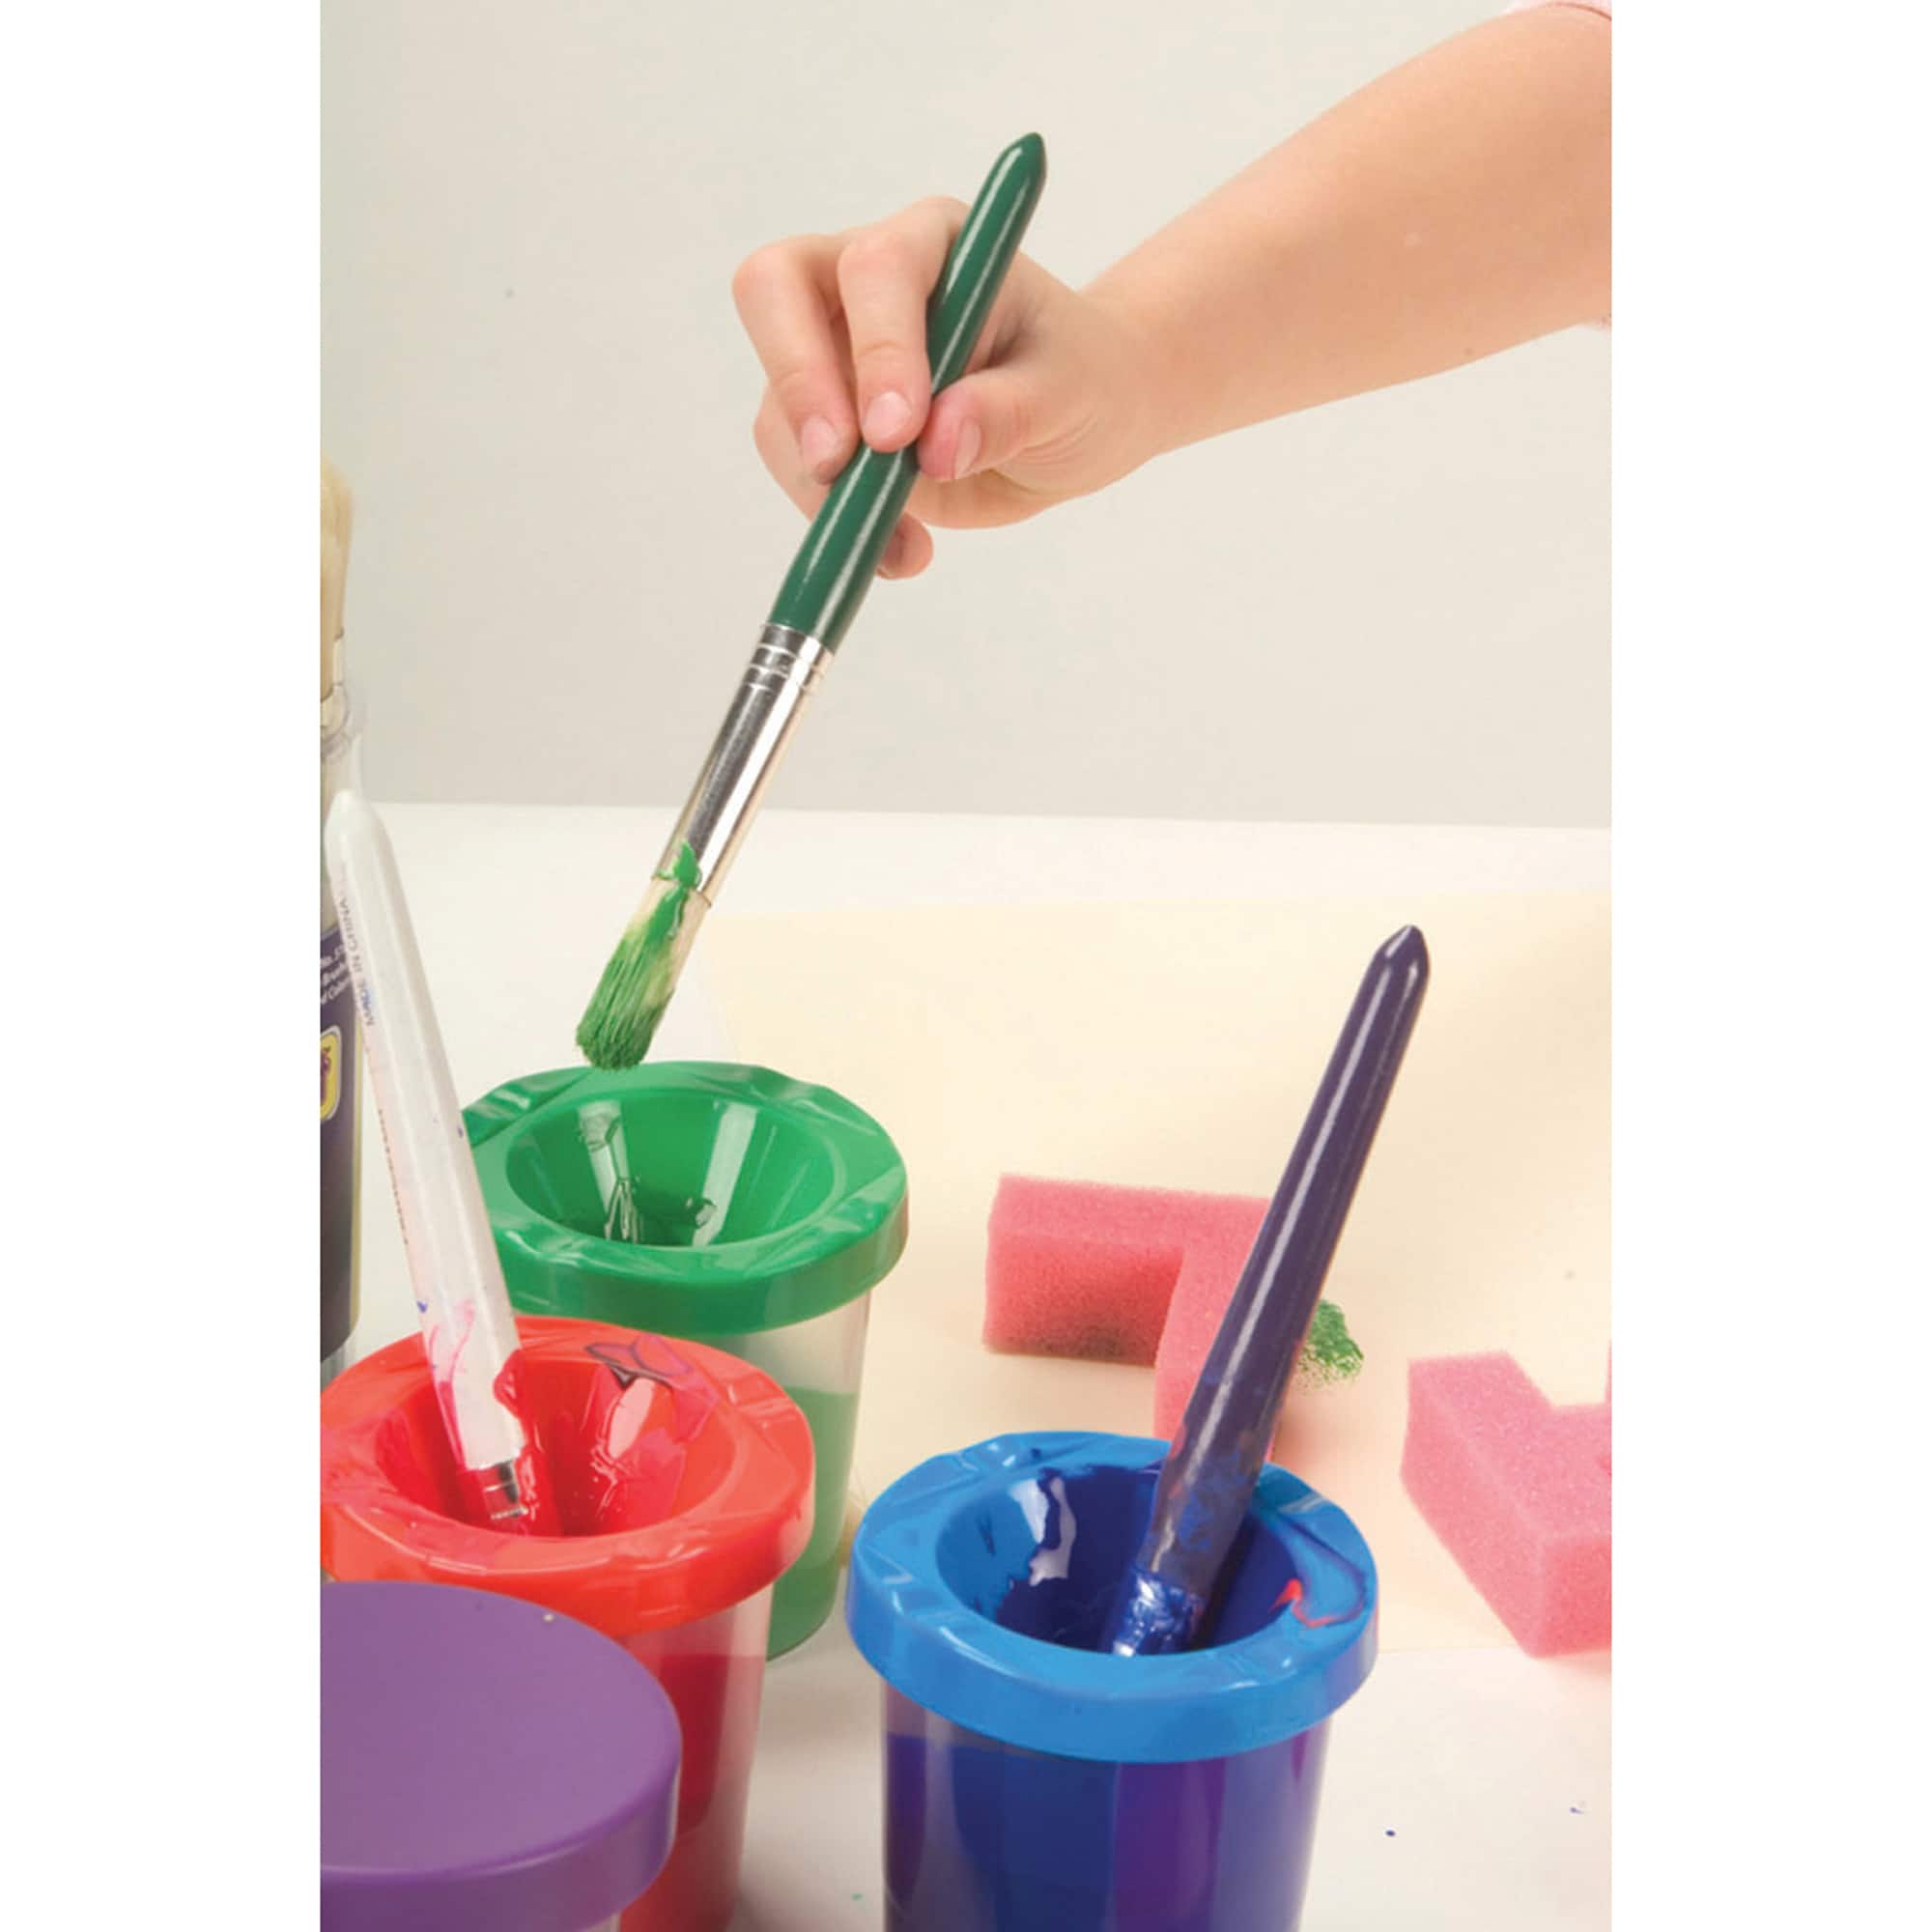 Paint Cups Toddler Painting Set Spill Proof Paint Cups Children's No Spill Paint Cups with Assorted Colored Lids Matching Plastic Handles Brushes